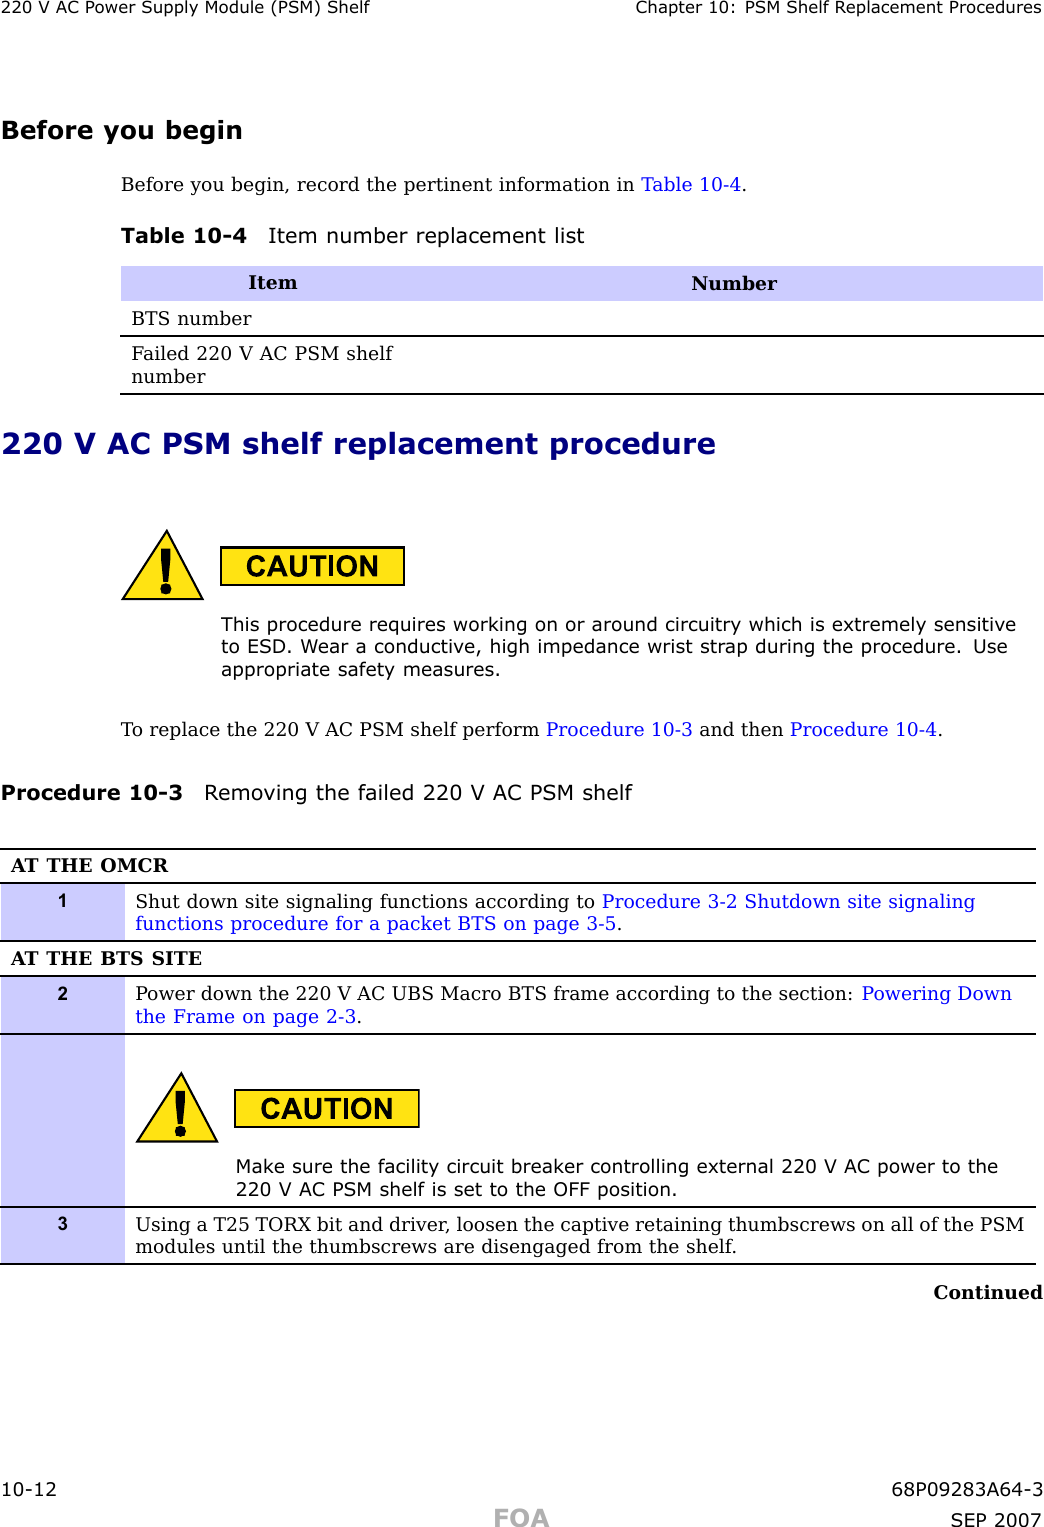 220 V AC P ower Supply Module (PSM) Shelf Chapter 10: PSM Shelf R eplacement ProceduresBefore you beginBefore you begin, record the pertinent information in T able 10 -4 .Table 10 -4 Item number replacement listItemNumberBTS numberF ailed 220 V AC PSM shelfnumber220 V AC PSM shelf replacement procedureThis procedure requires working on or around circuitry which is extremely sensitiv eto ESD . W ear a conductiv e, high impedance wrist str ap during the procedure. Useappropriate safet y measures.T o replace the 220 V AC PSM shelf perform Procedure 10 -3 and then Procedure 10 -4 .Procedure 10 -3 R emo ving the failed 220 V AC PSM shelfA T THE OMCR1Shut down site signaling functions according to Procedure 3-2 Shutdown site signalingfunctions procedure for a packet BTS on page 3- 5 .A T THE BTS SITE2P ower down the 220 V AC UBS Macro BTS frame according to the section: P owering Downthe Frame on page 2- 3 .Mak e sure the facilit y circuit break er controlling external 220 V AC power to the220 V AC PSM shelf is set to the OFF position.3Using a T25 TORX bit and driver , loosen the captive retaining thumbscrews on all of the PSMmodules until the thumbscrews are disengaged from the shelf .Continued10 -12 68P09283A64 -3FOA SEP 2007